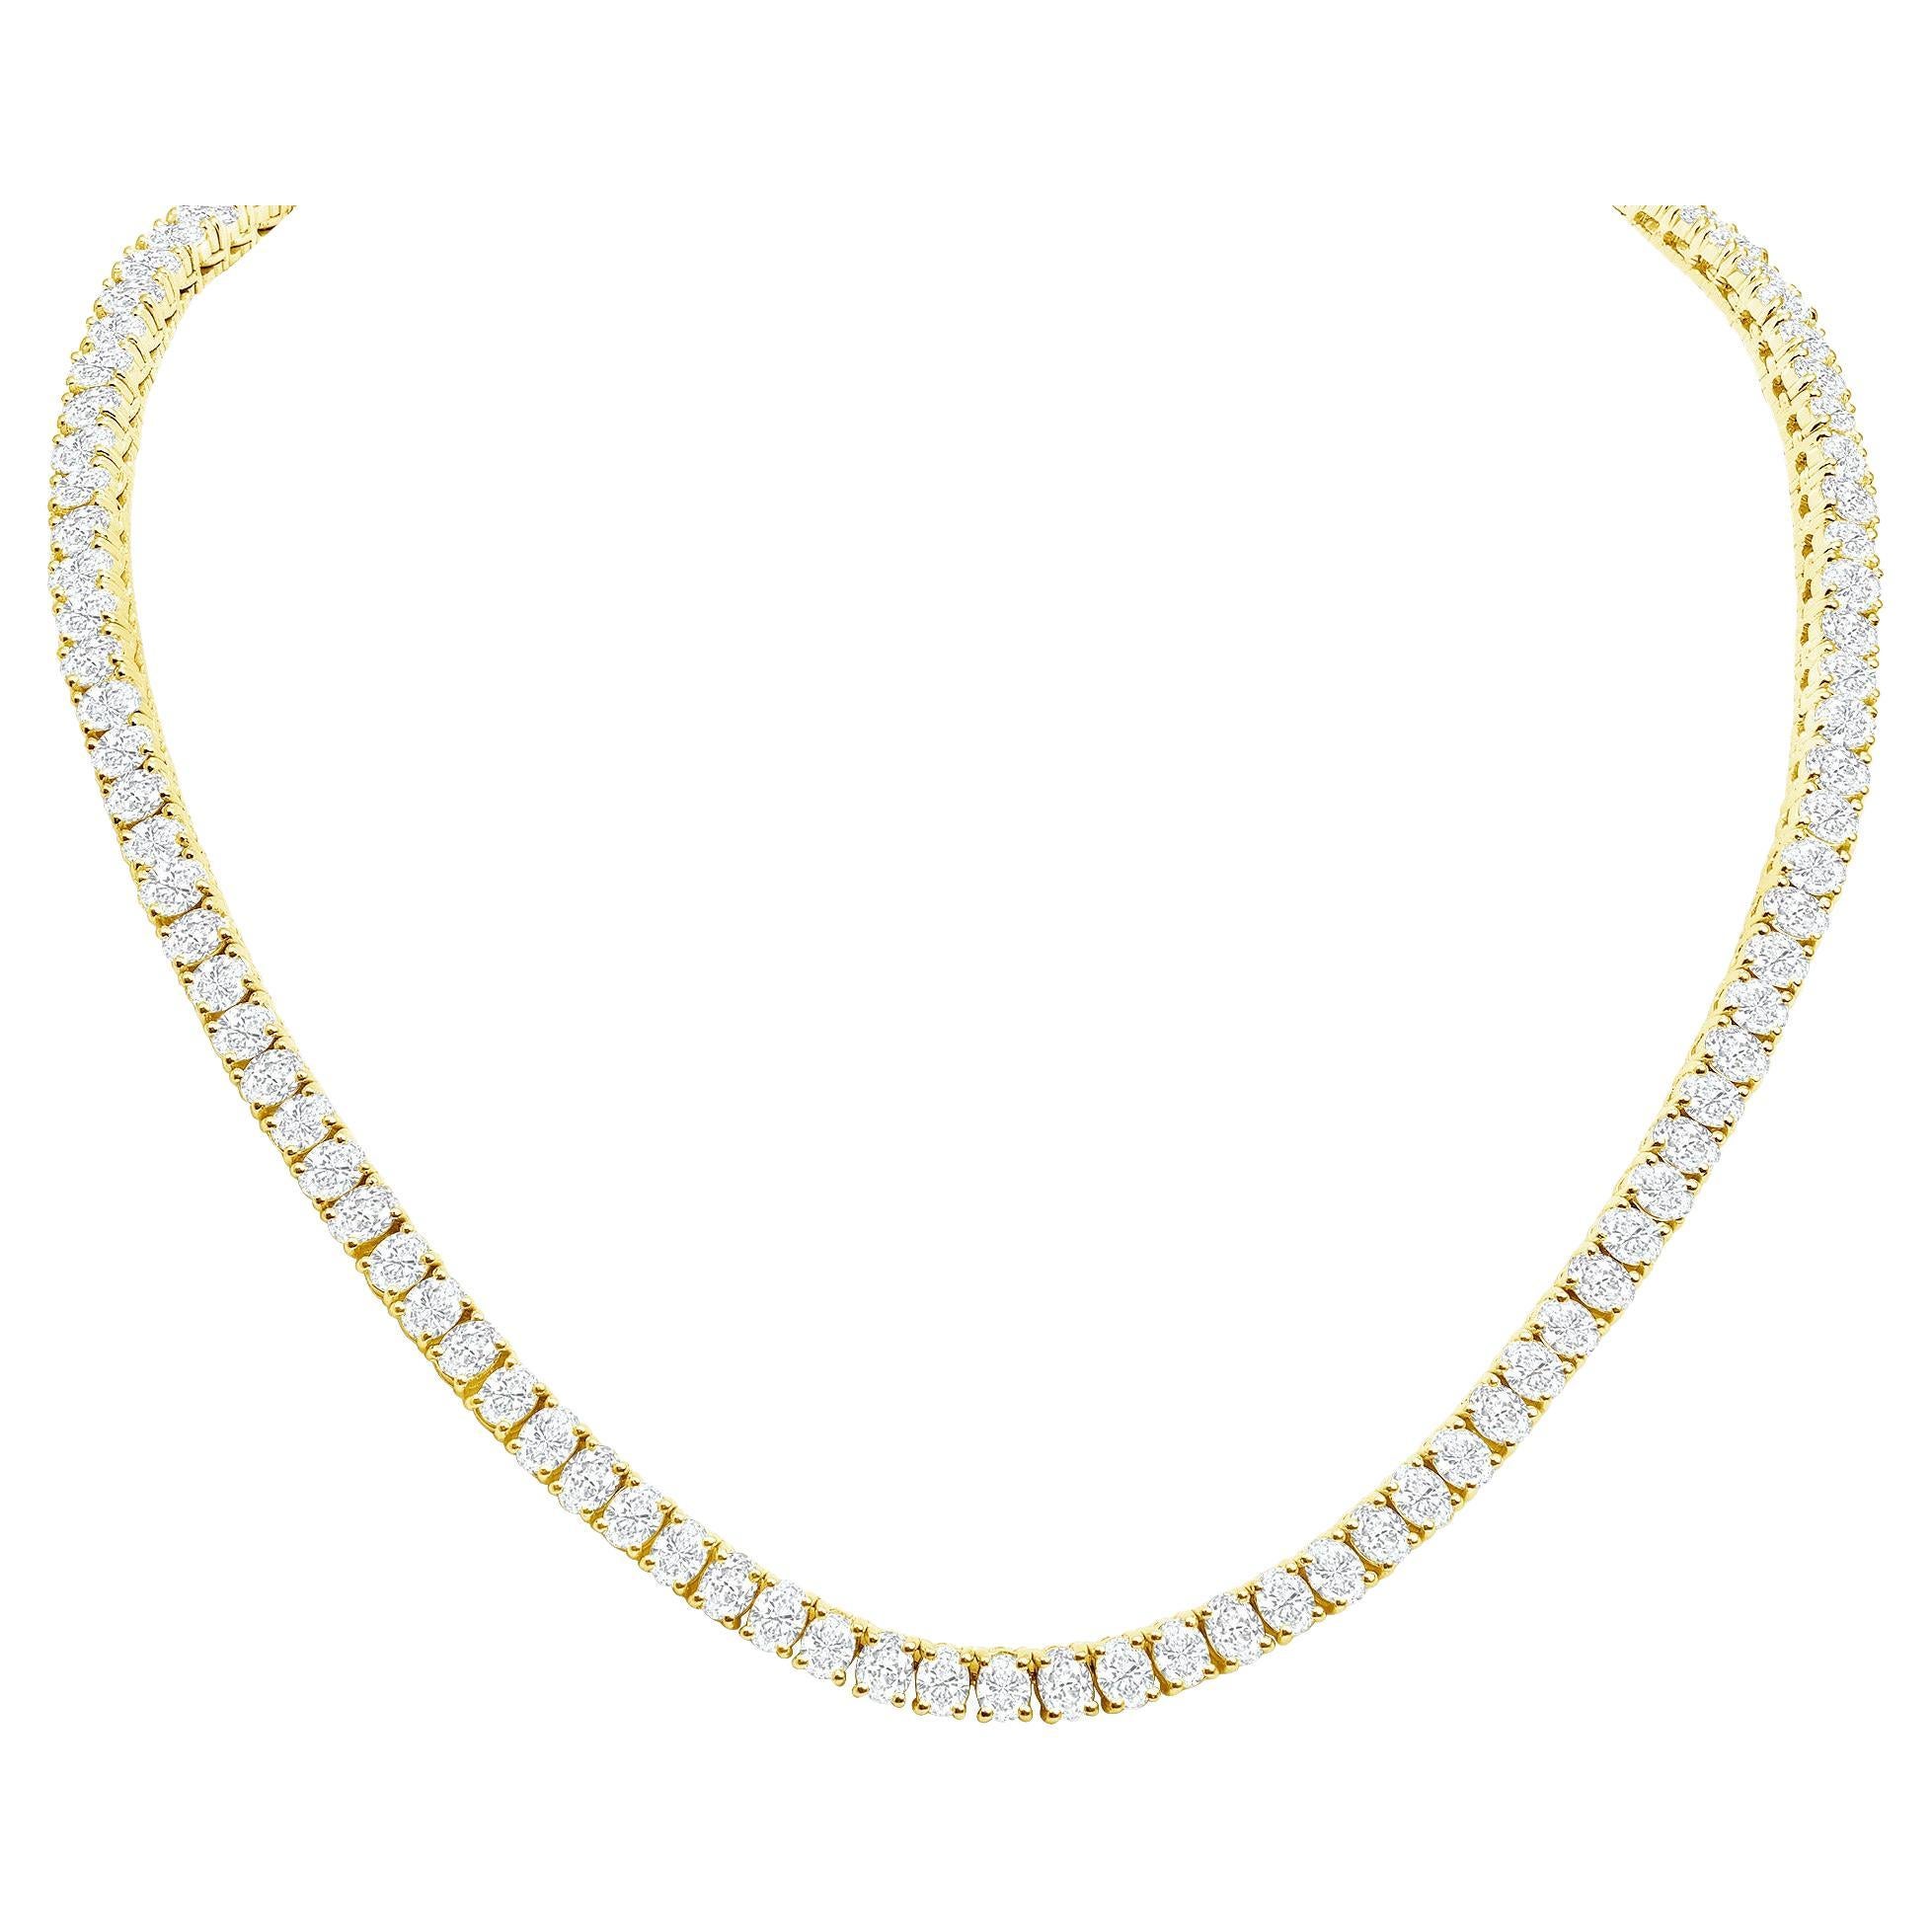 This diamond tennis necklace features beautifully cut Oval diamonds set gorgeously in 18k gold.

Metal: 18k Gold
Diamond Cut: Oval Natural (Not Lab Grown or Moissanite) 
Total Approx. Diamond Carats: 20
Diamond Clarity: VS-SI1
Diamond Color: